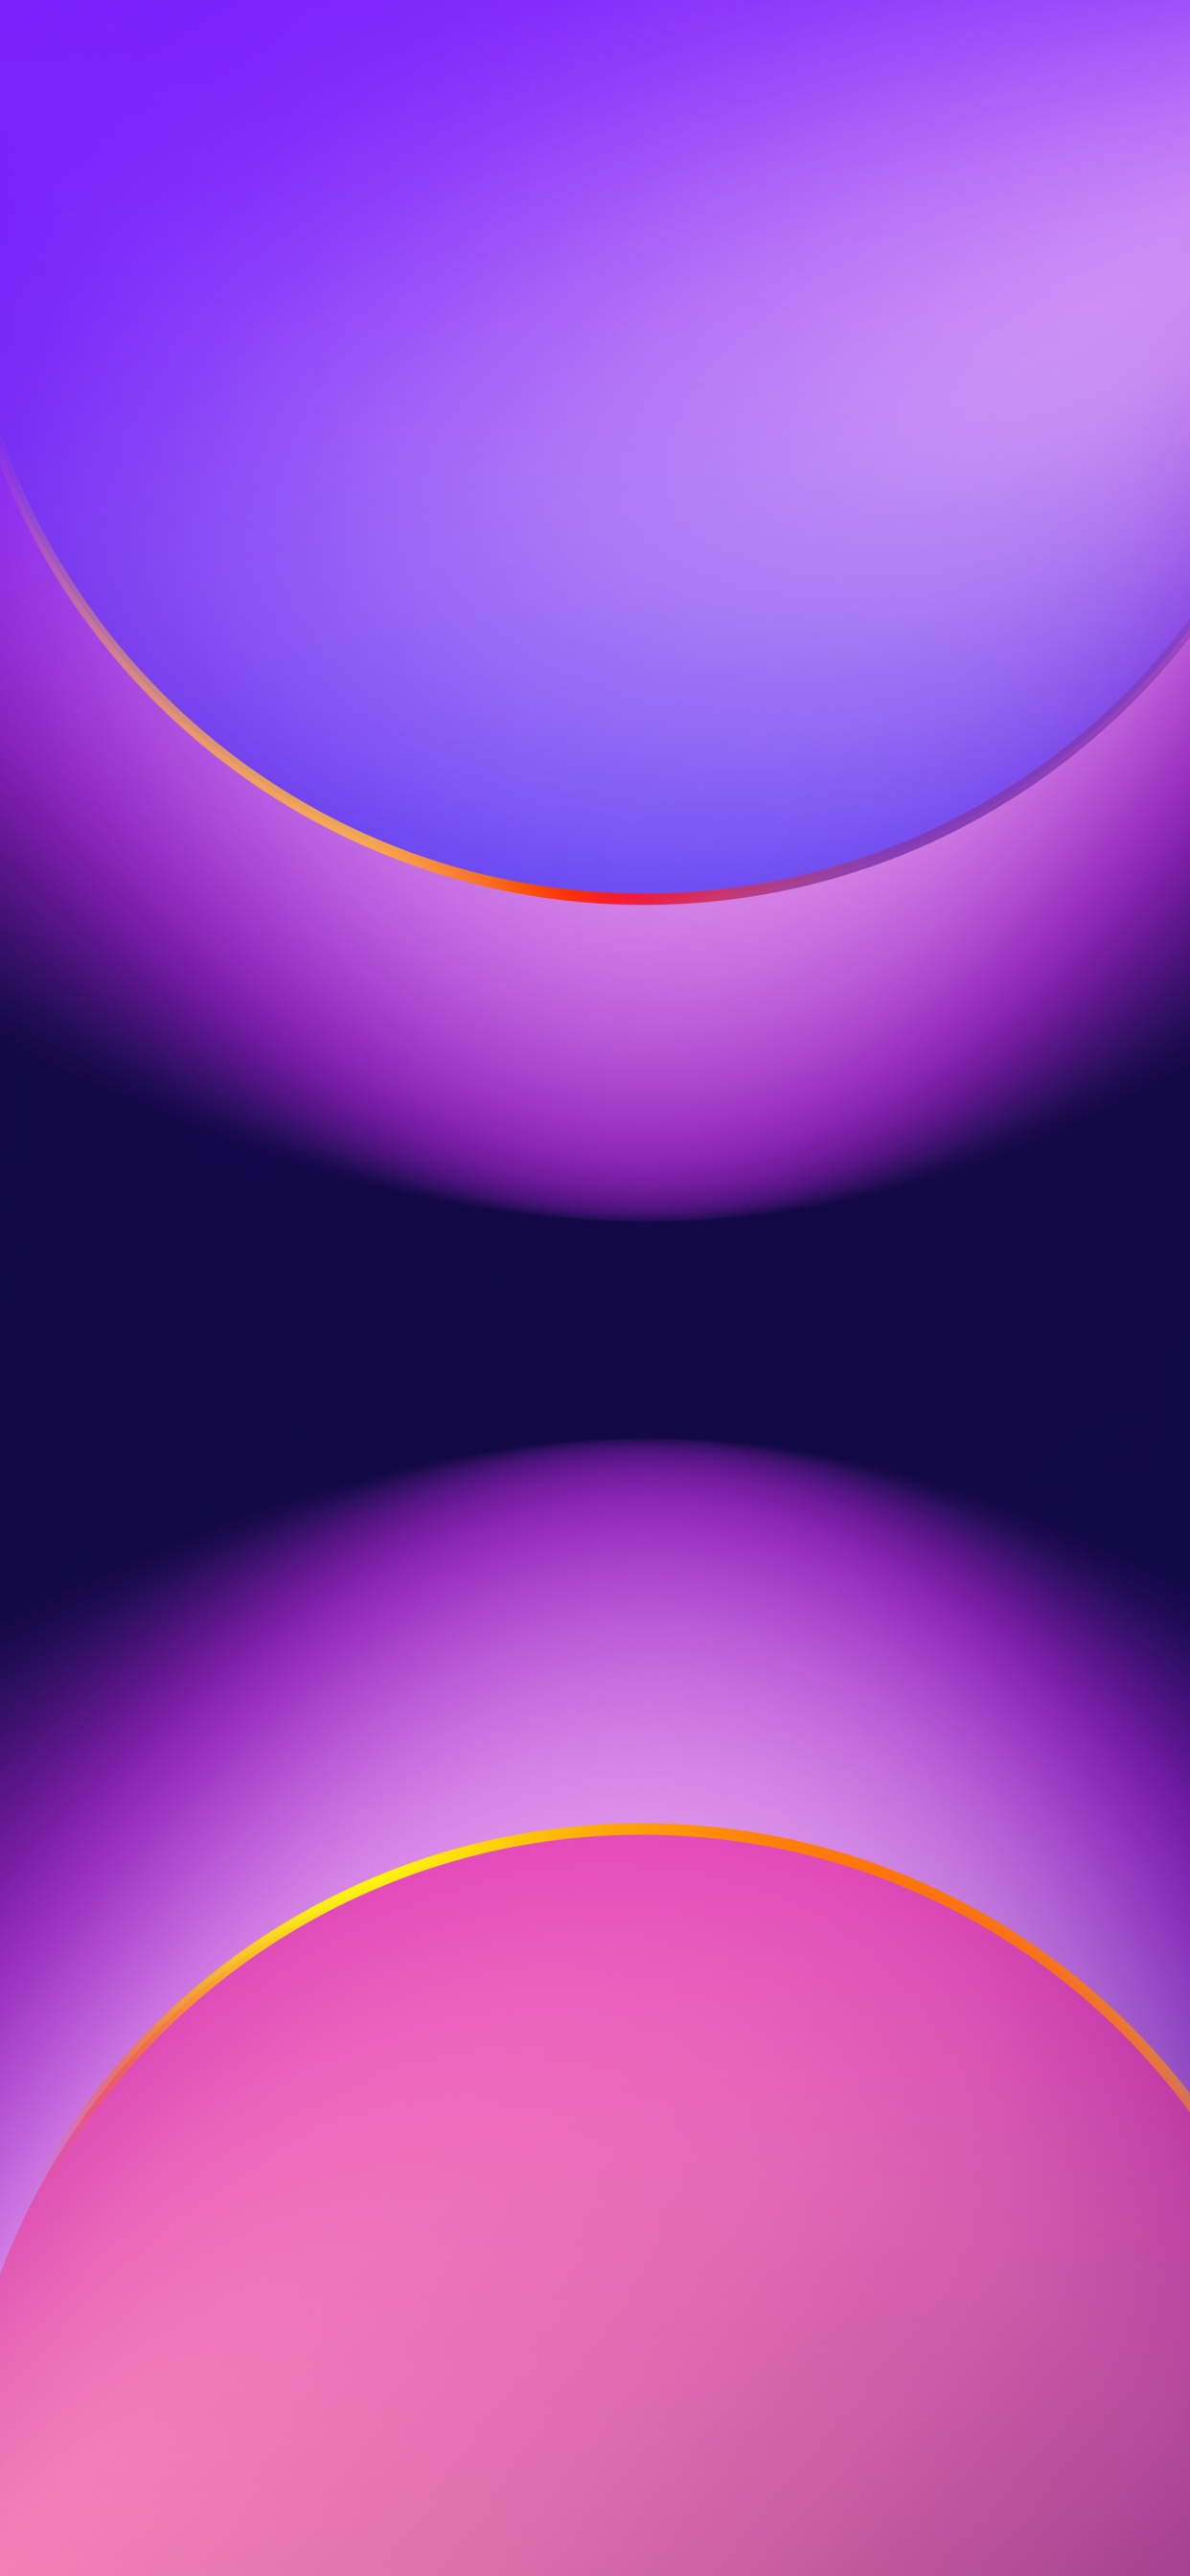 Circle, Apples, Ios, Colorfulness, Purple. Wallpaper in 1242x2688 Resolution